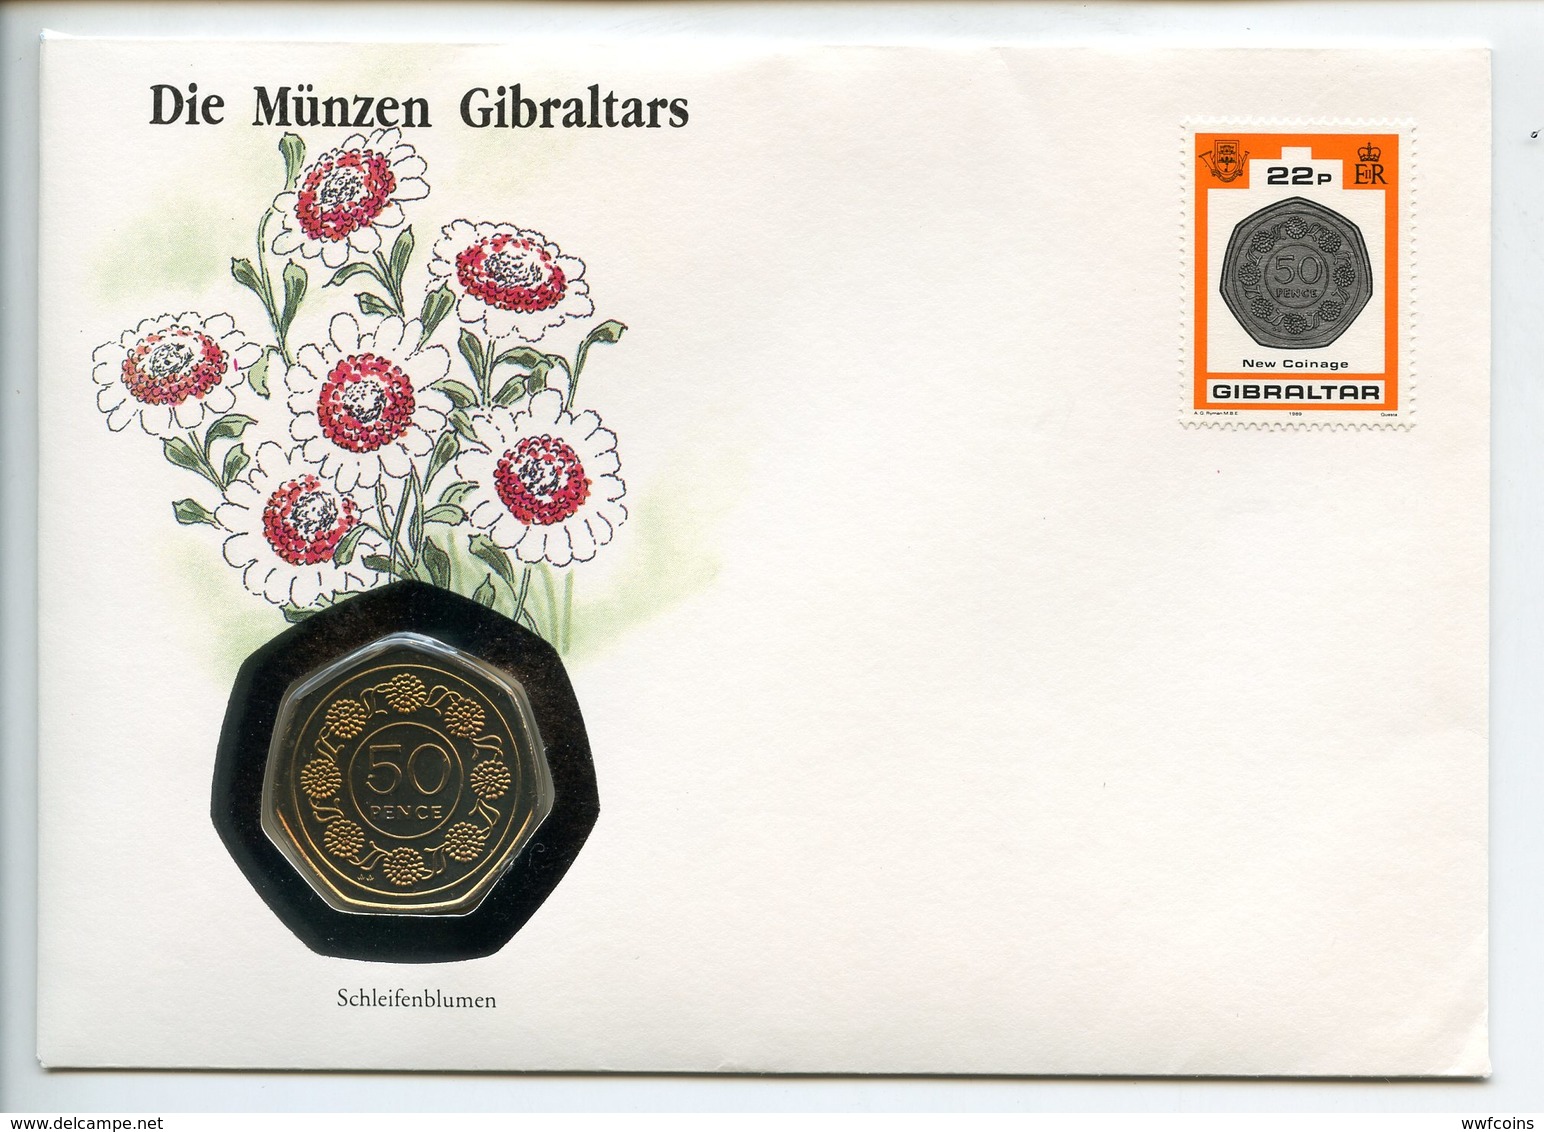 POSTCARD STAMP BUSTA FRANCOBOLLO GIBRALTAR 50 PENCE 1989 LOOP FLOWERS FAUNA NEW COINAGE FIRST DAY OF ISSUE FDC UNC (1) - Gibraltar